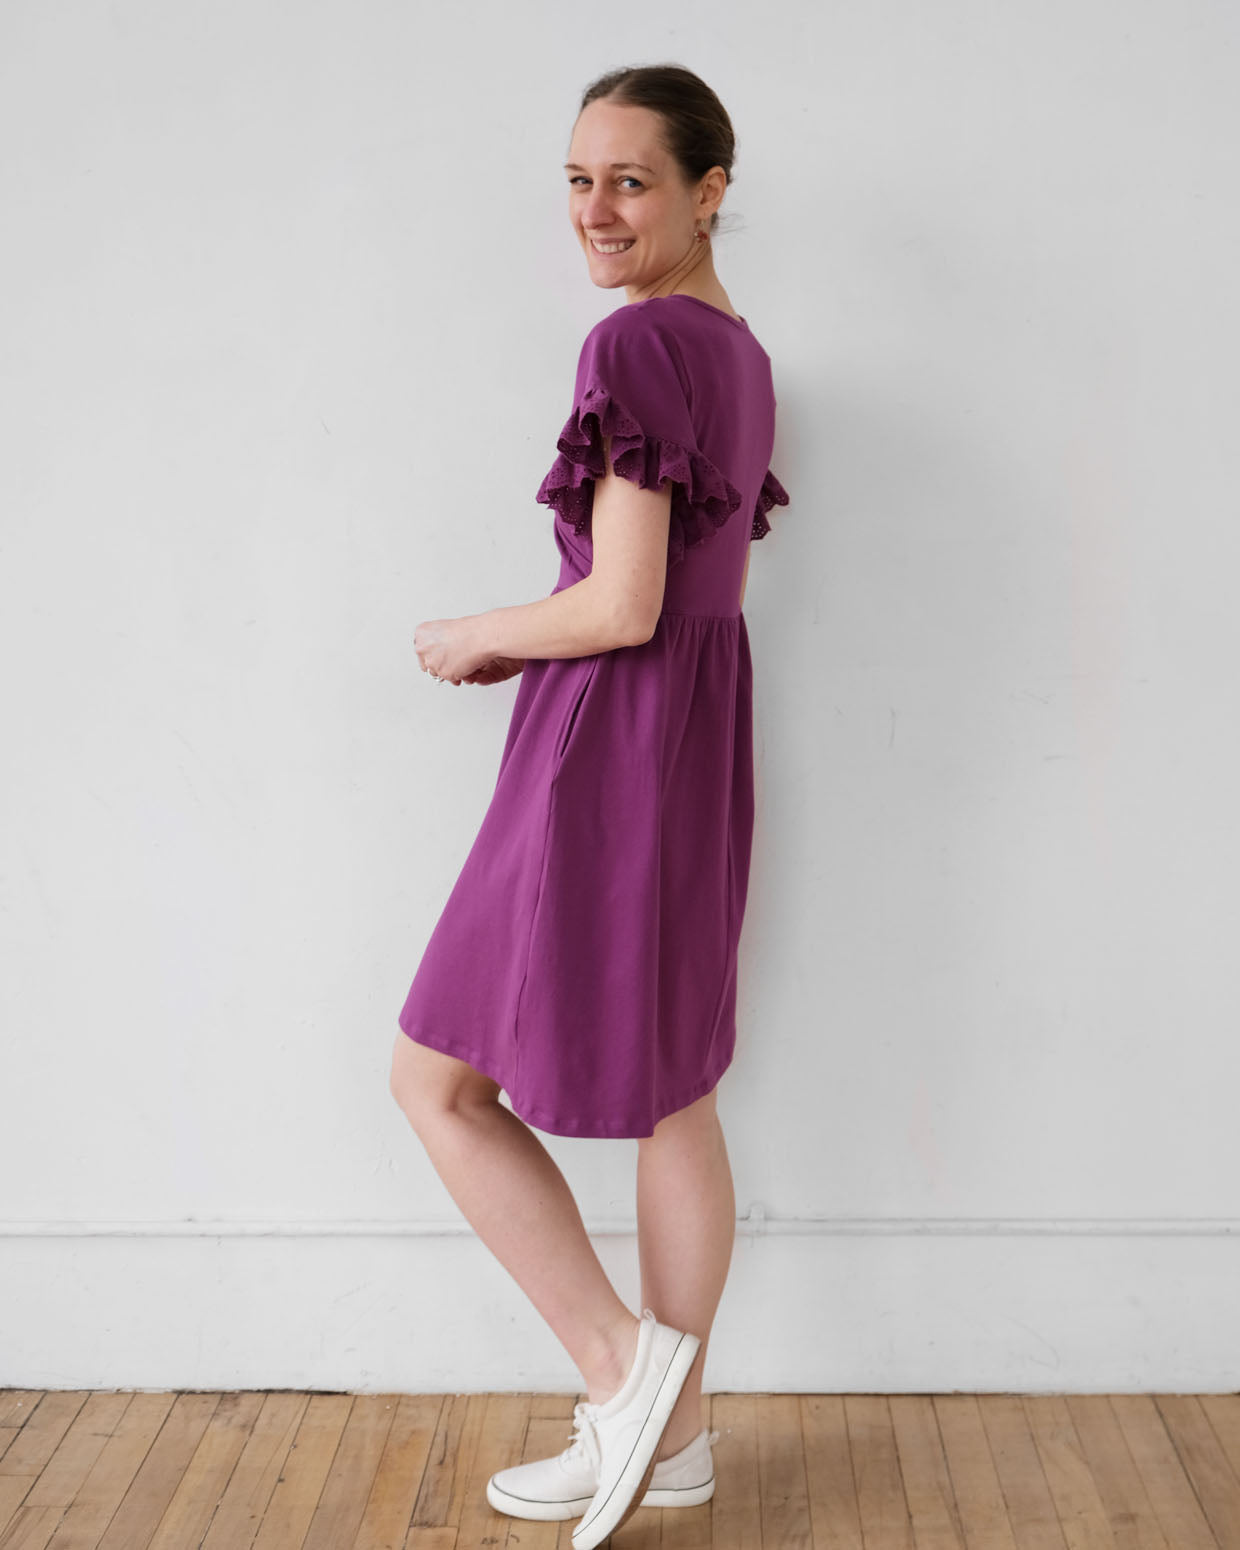 MELODY dress in Grape